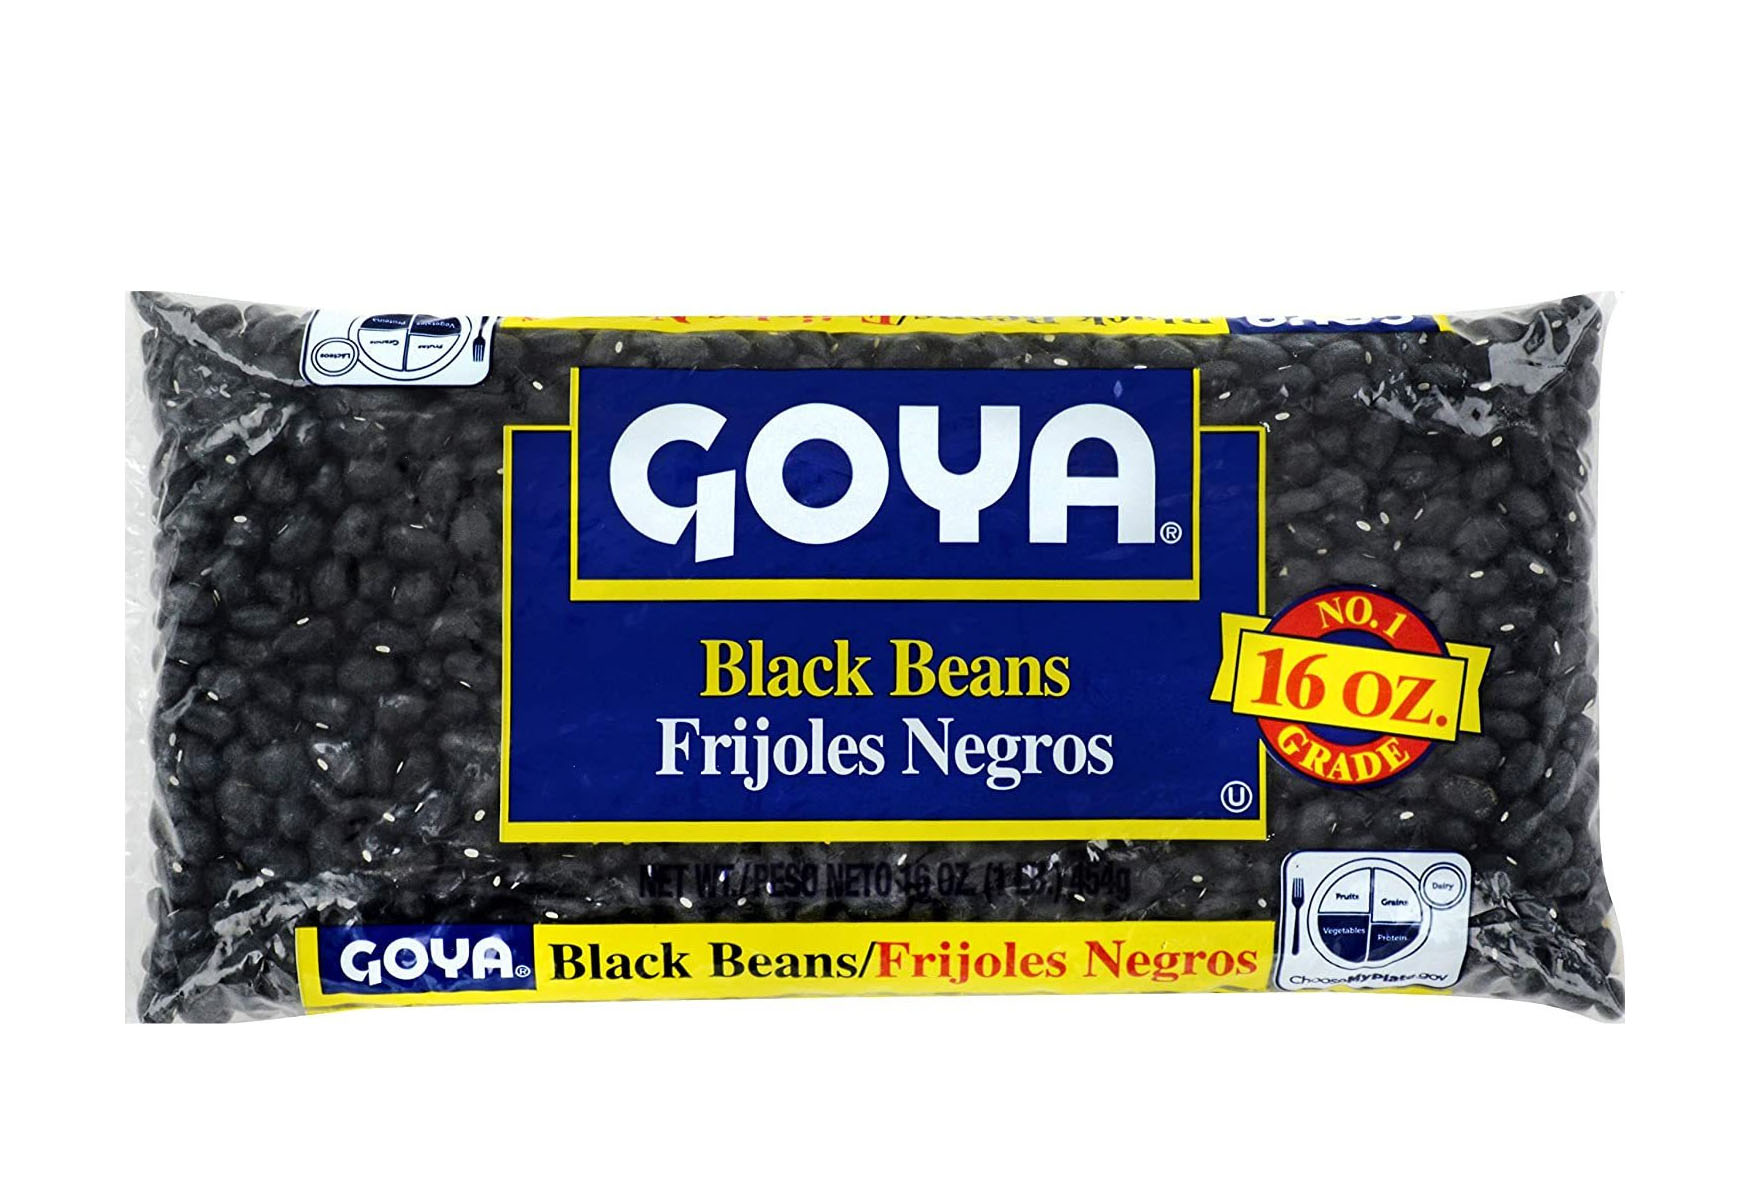 11 Goya Black Beans Nutrition Facts - Facts.net